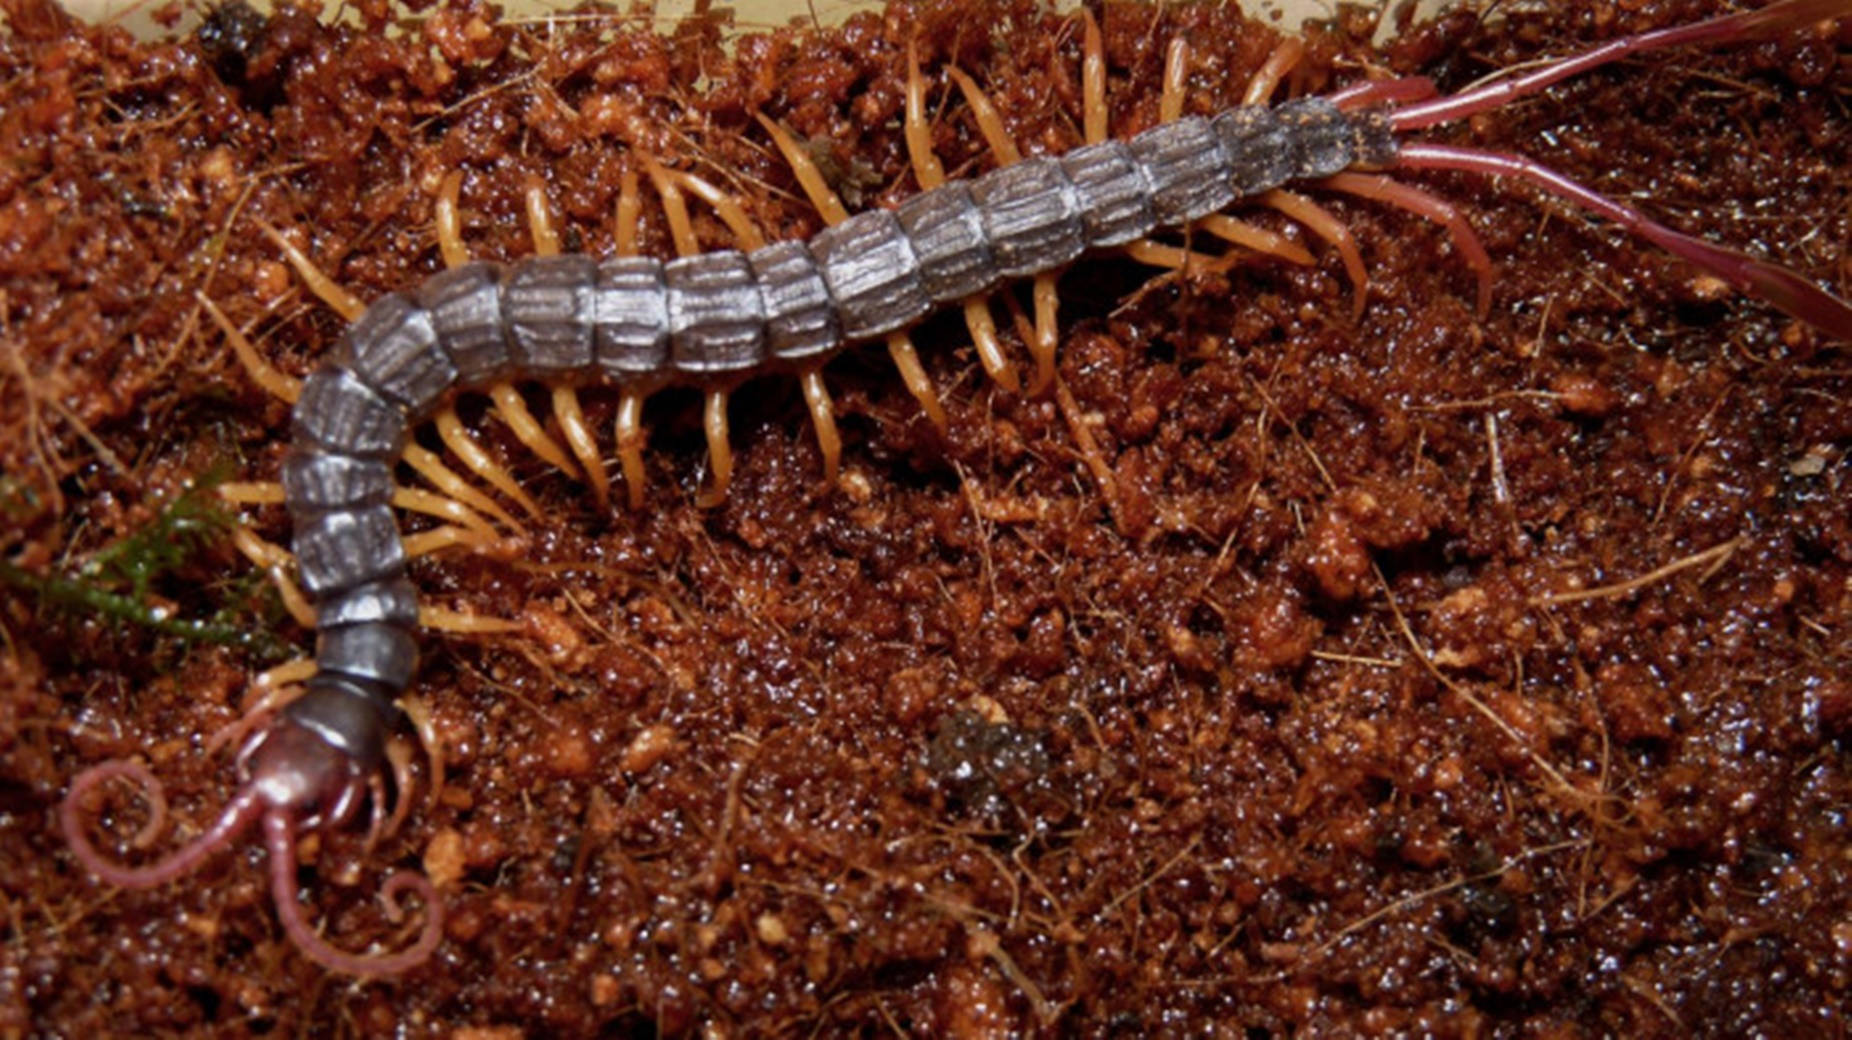 Surreal view of a Centipede Crawling on Brown Earth Wallpaper